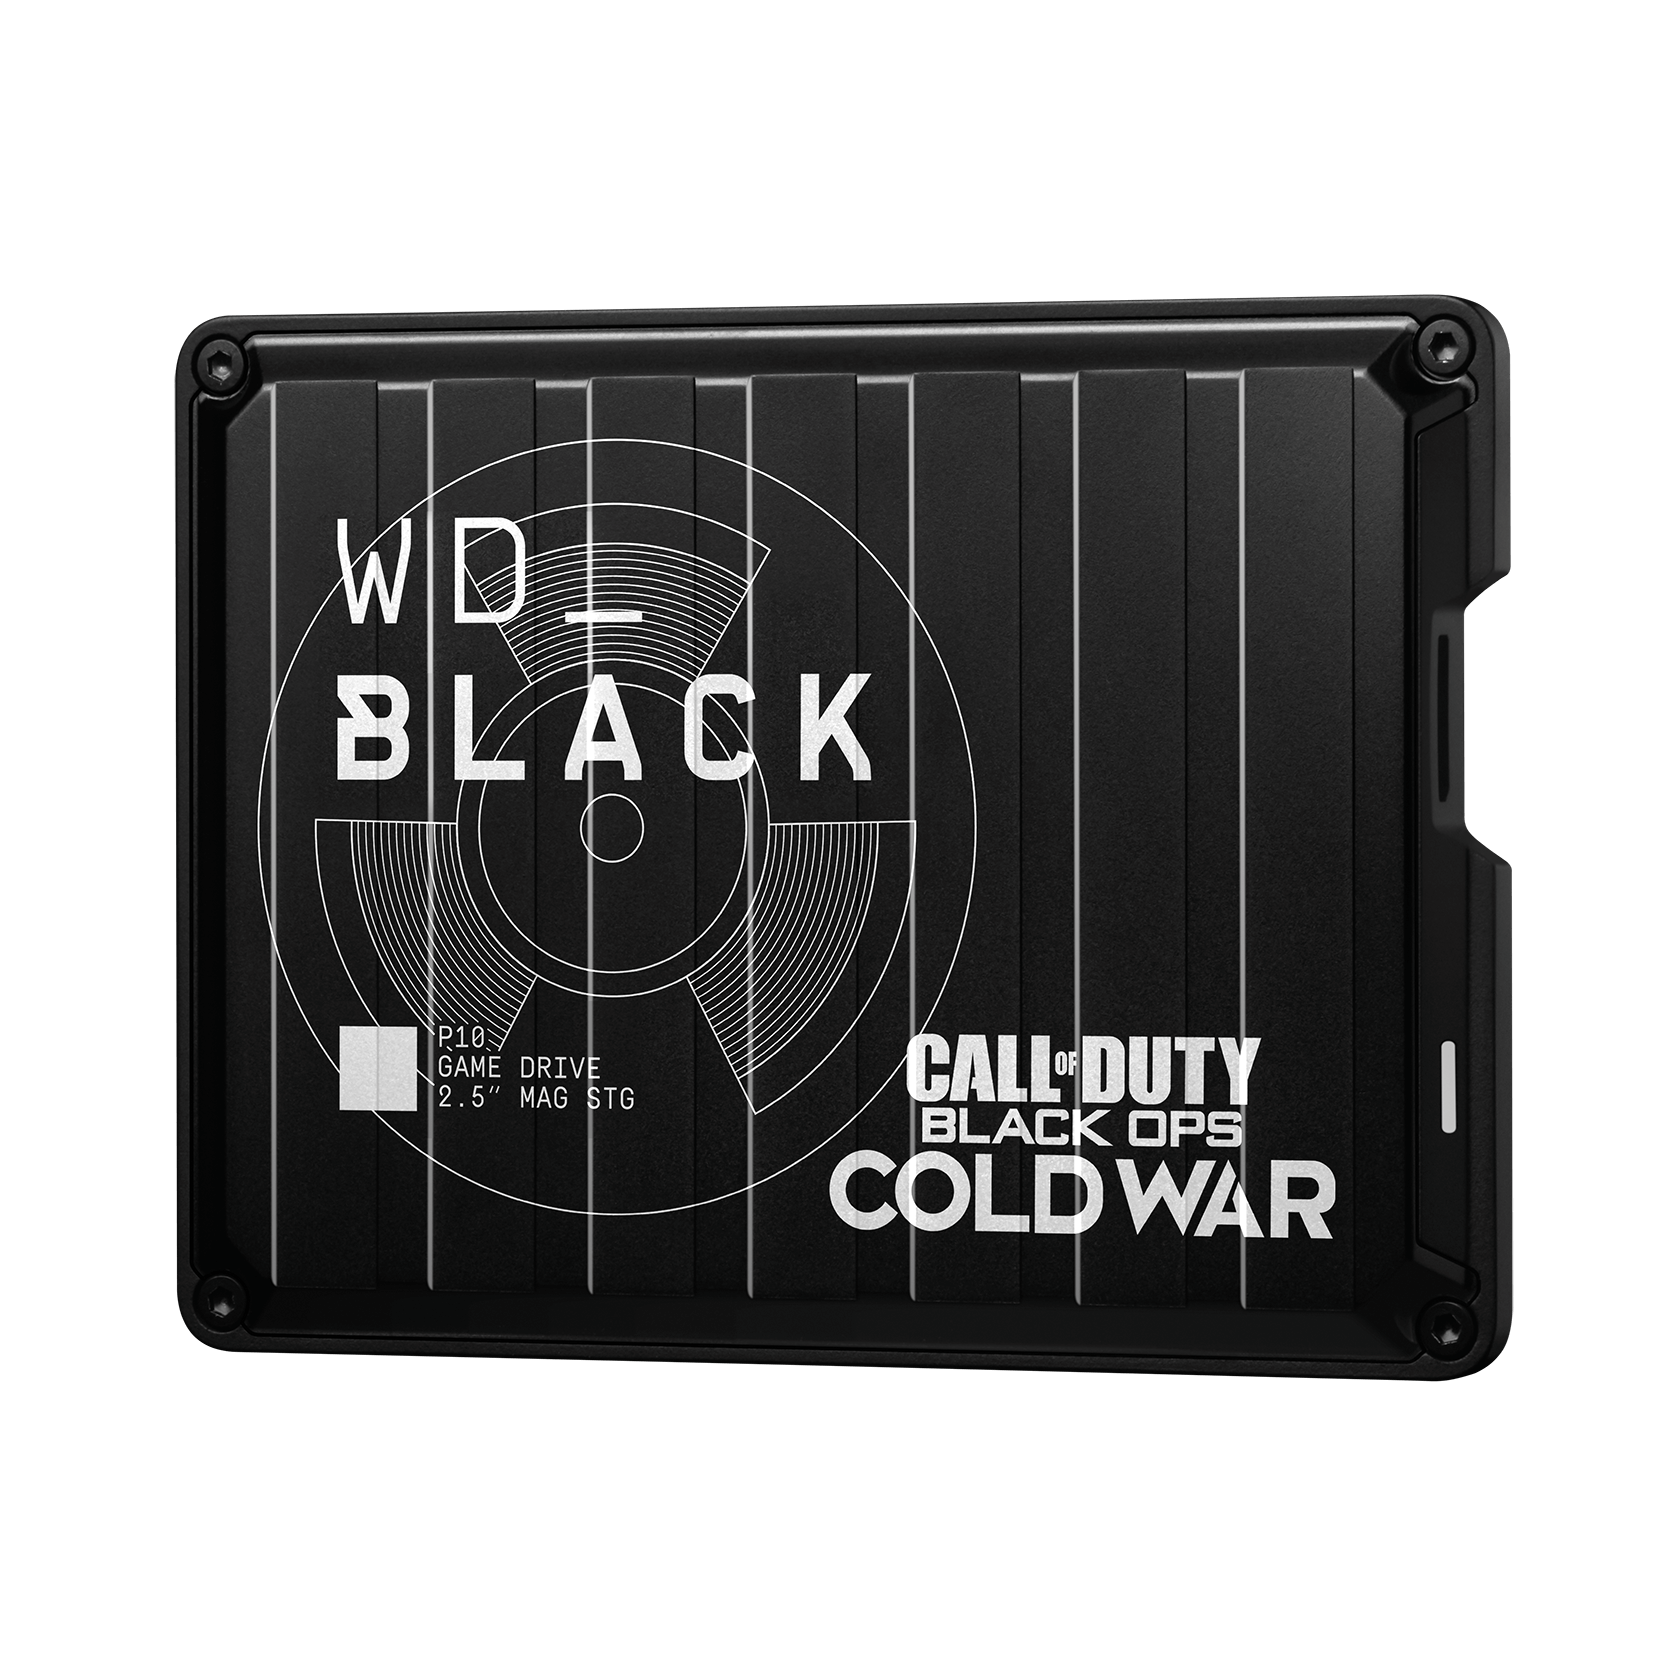 WD_BLACK 2TB Call of Duty: Black Ops Cold War Special Edition P10 Game Drive, Portable External Hard Drive - WDBAZC0020BBK-WESN - image 3 of 7